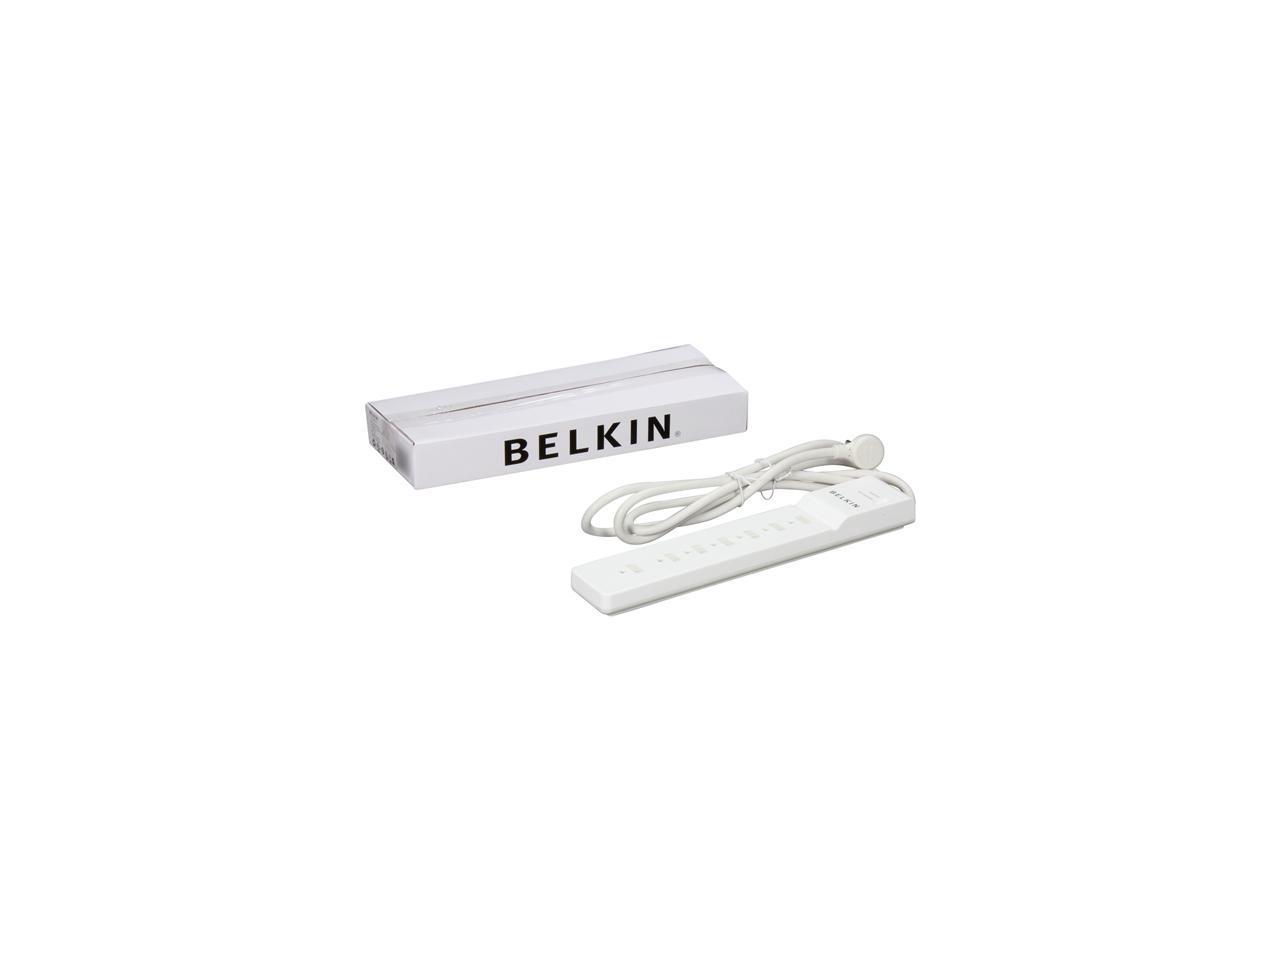 BELKIN BE107000-07-CM 7.0 Feet 7 Outlets 2160 Joules Surge Protector